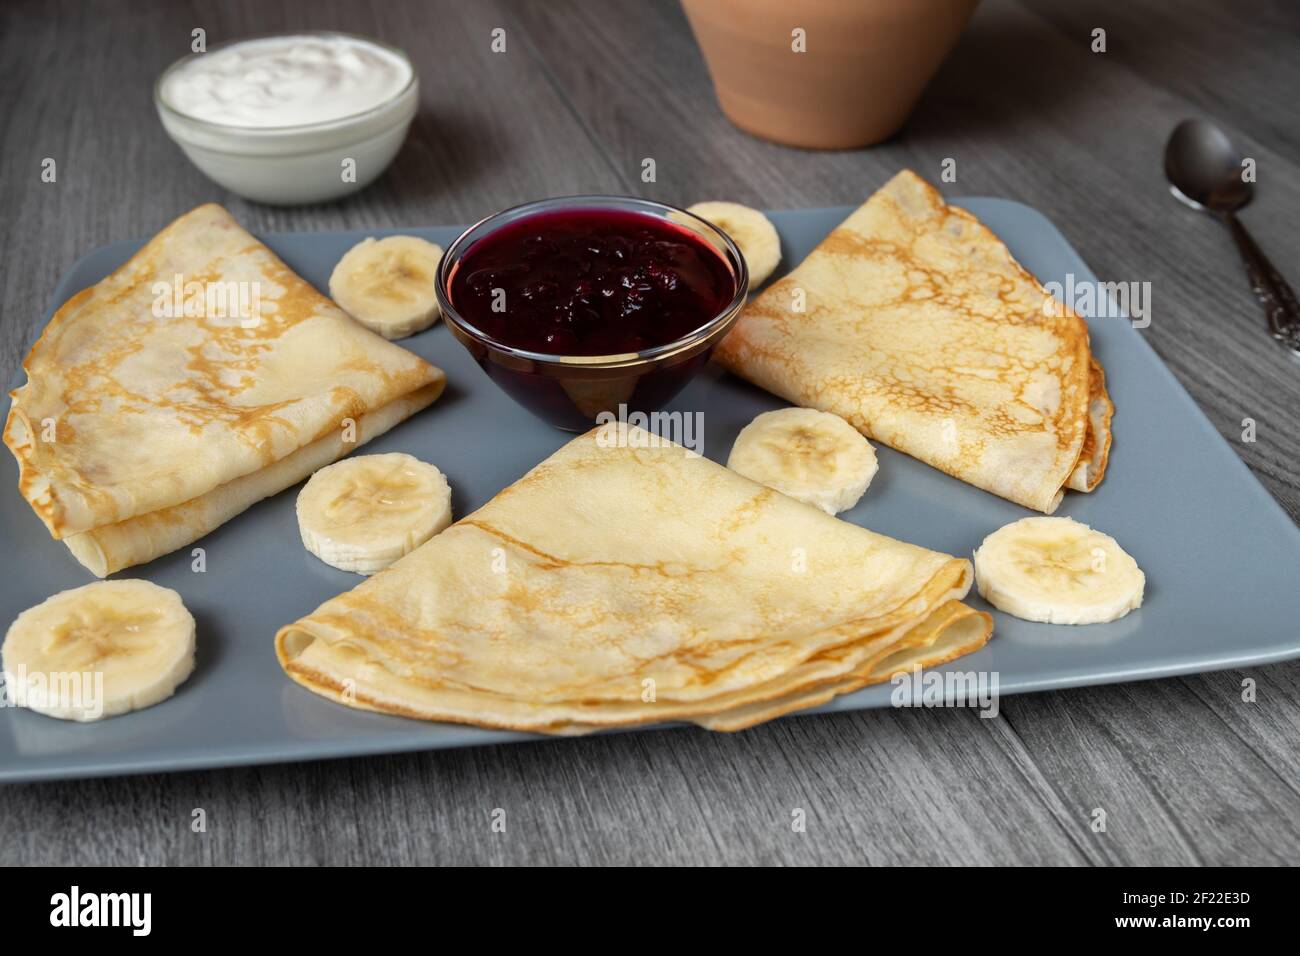 A portion of triangle-shaped pancakes on a gray-blue plate with banana, jam and sour cream Stock Photo